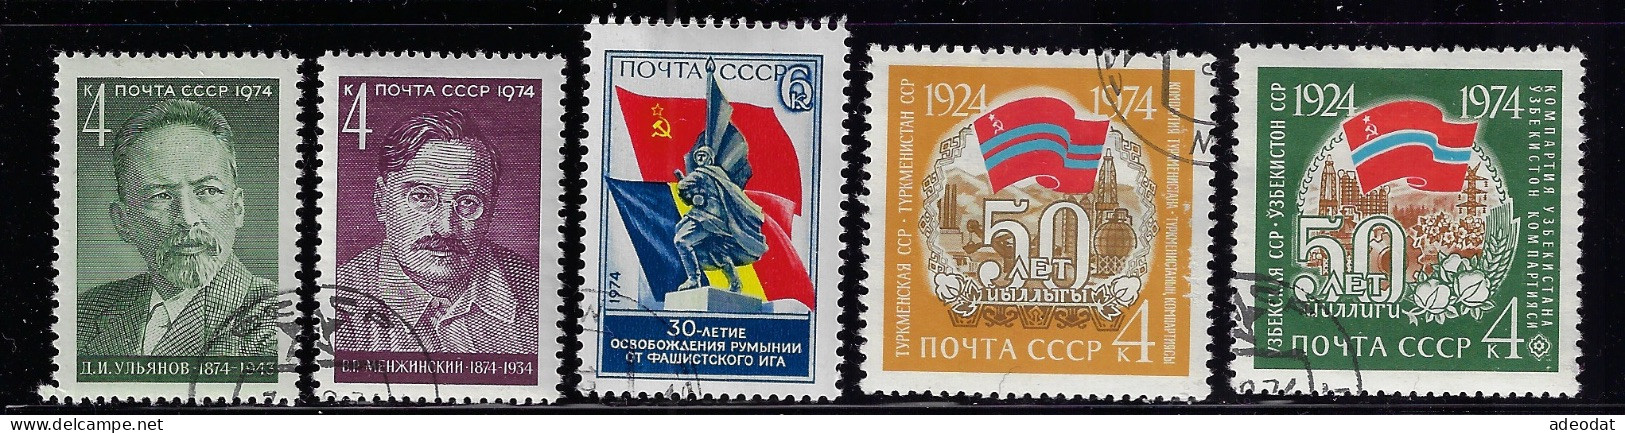 RUSSIA  1974 SCOTT #4228,4229,4236,4240,4241  USED - Used Stamps